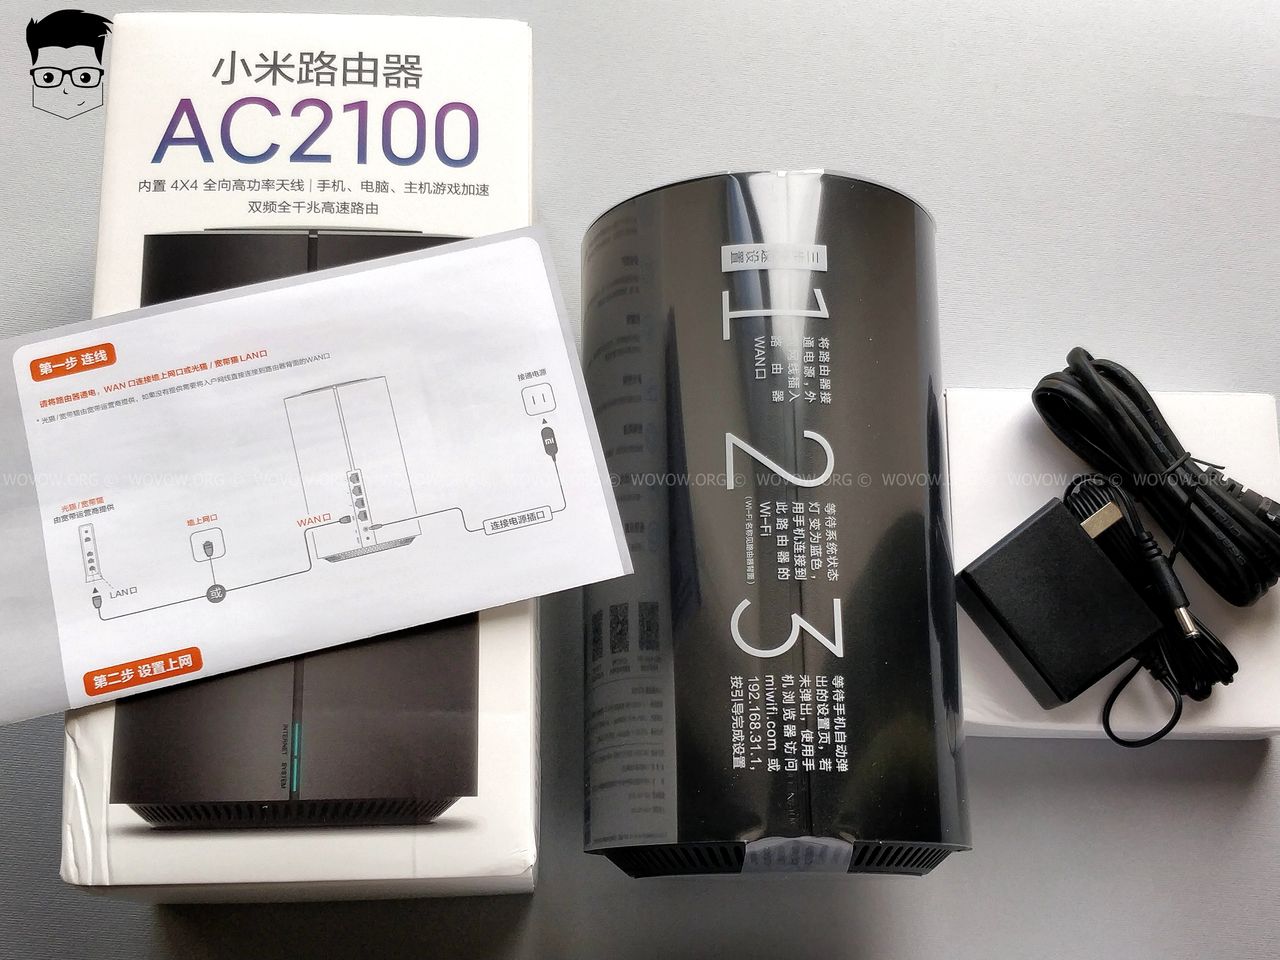 Xiaomi AC2100 Mi Router REVIEW In-Depth: Why Is This a Gaming Router?